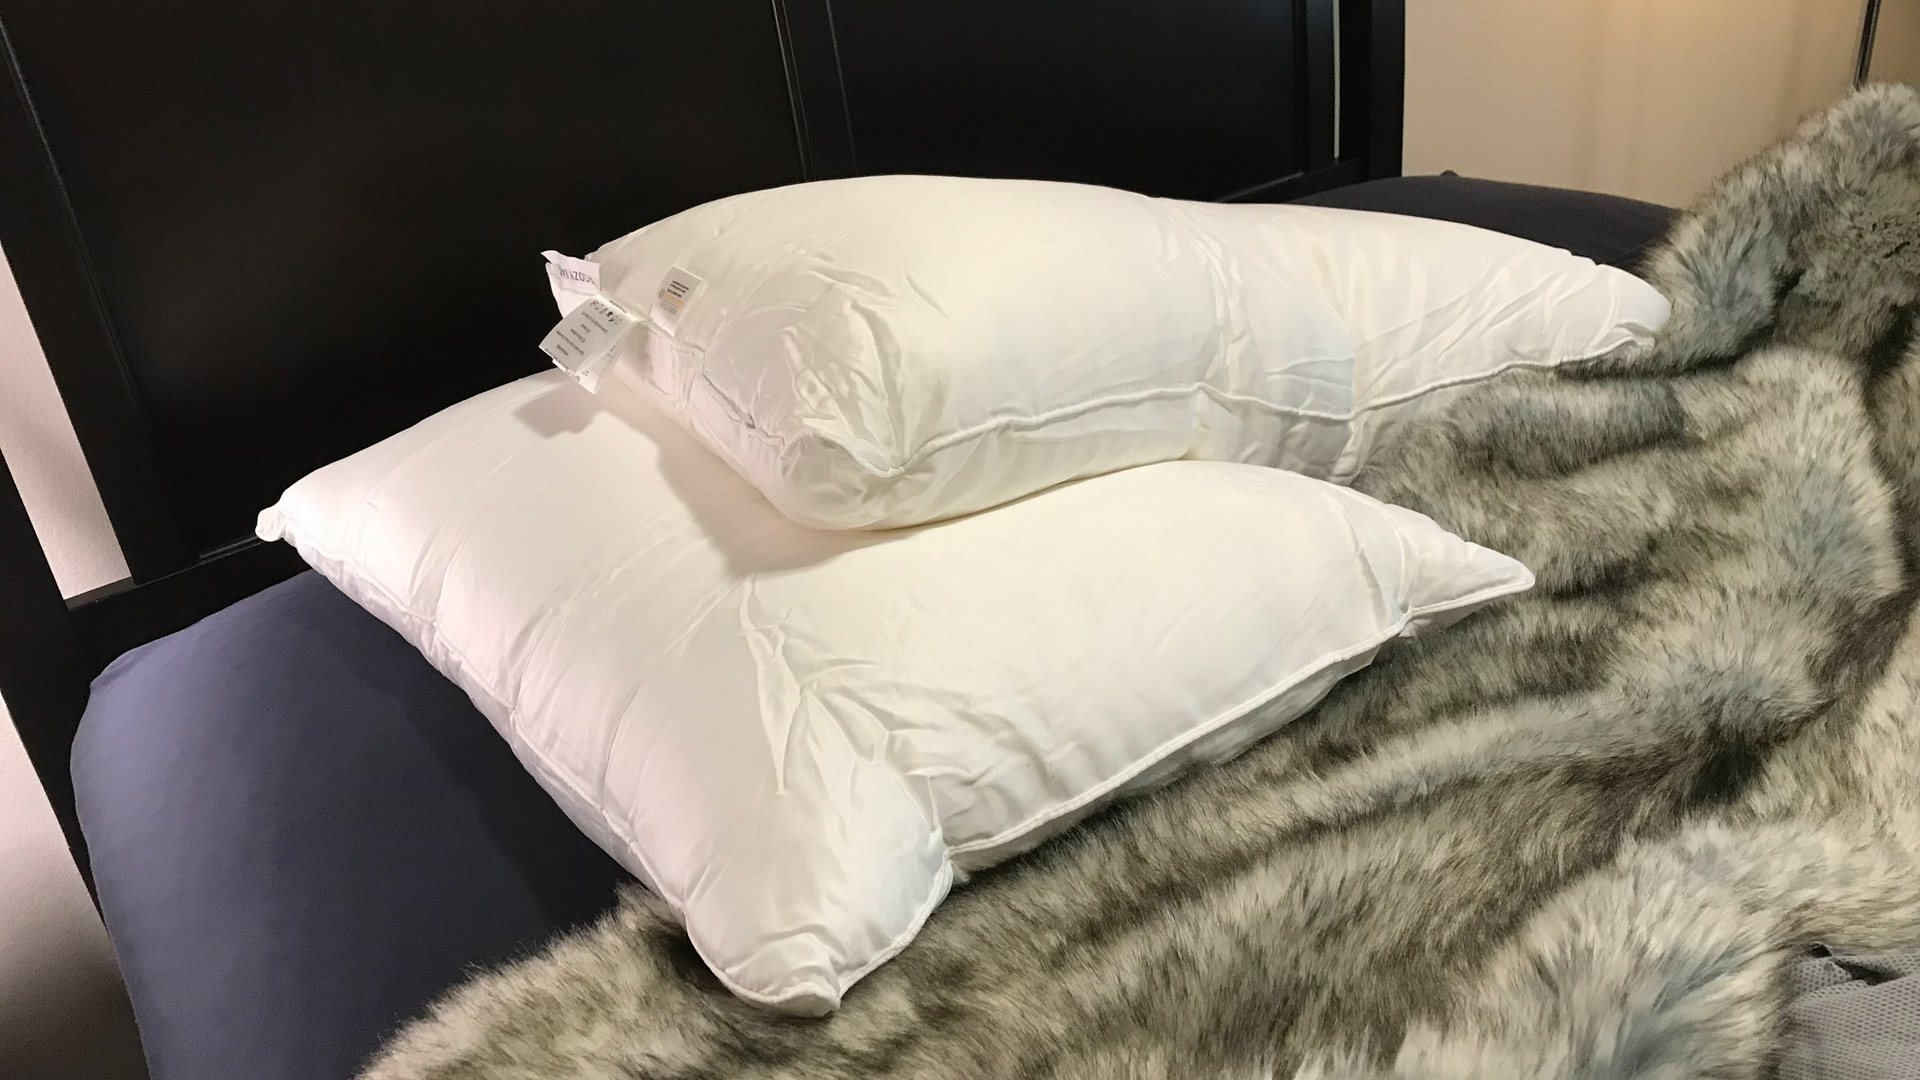 A pair of Cozy Earth Silk Pillows on a bed